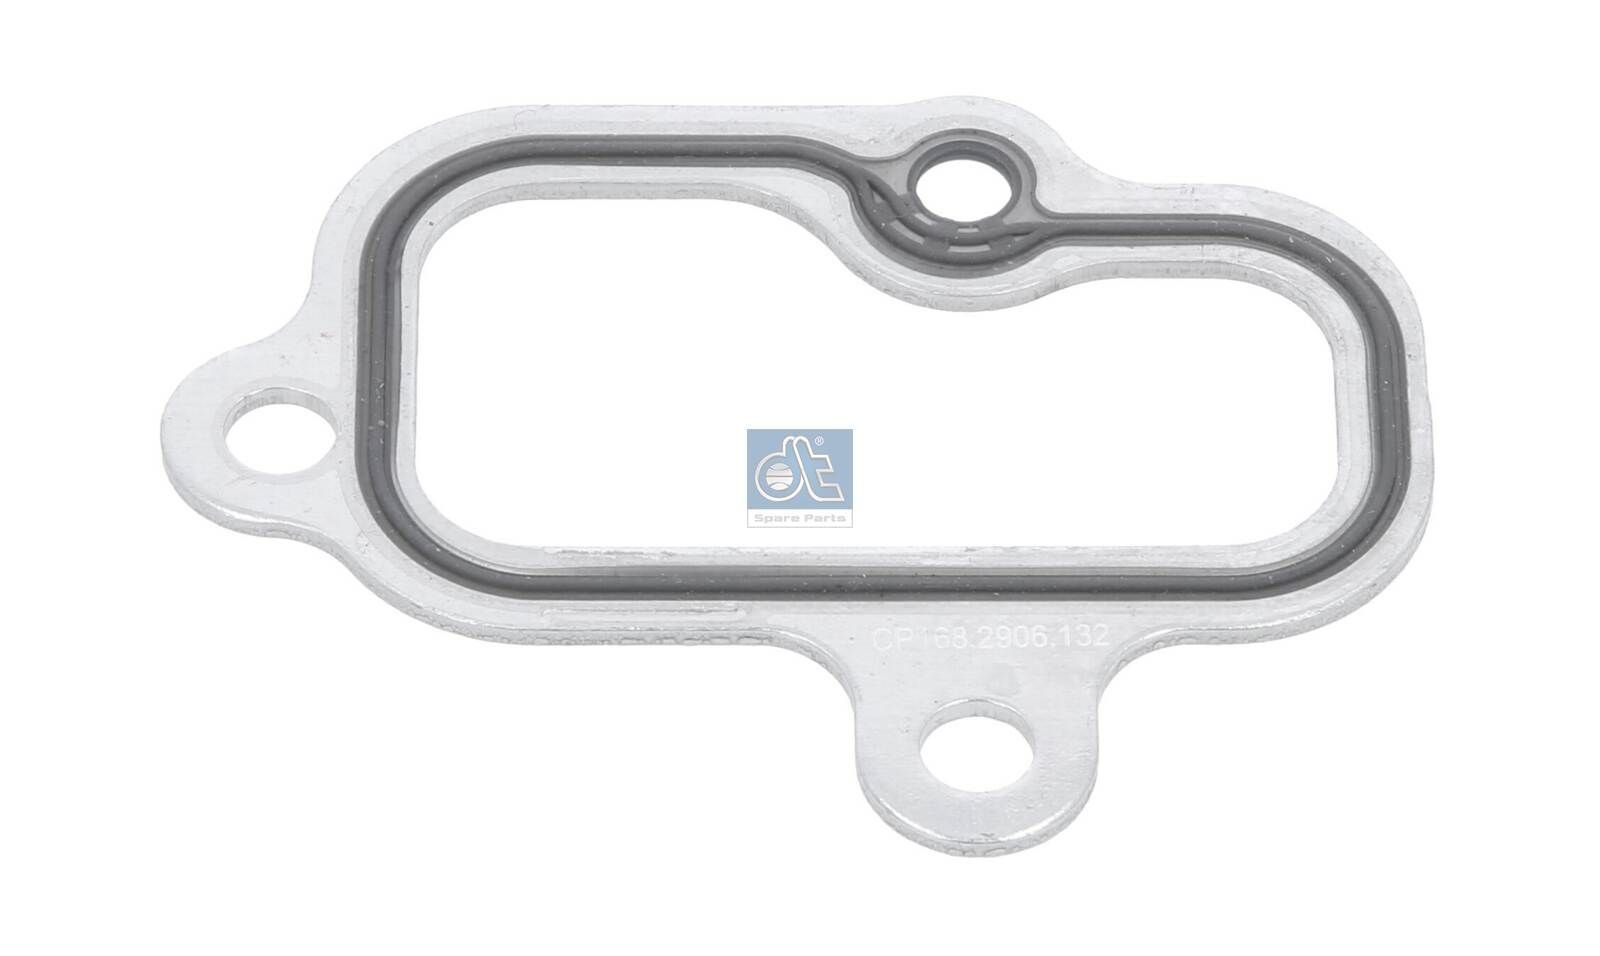 DT Spare Parts 3.18132 Exhaust manifold gasket 51089010202